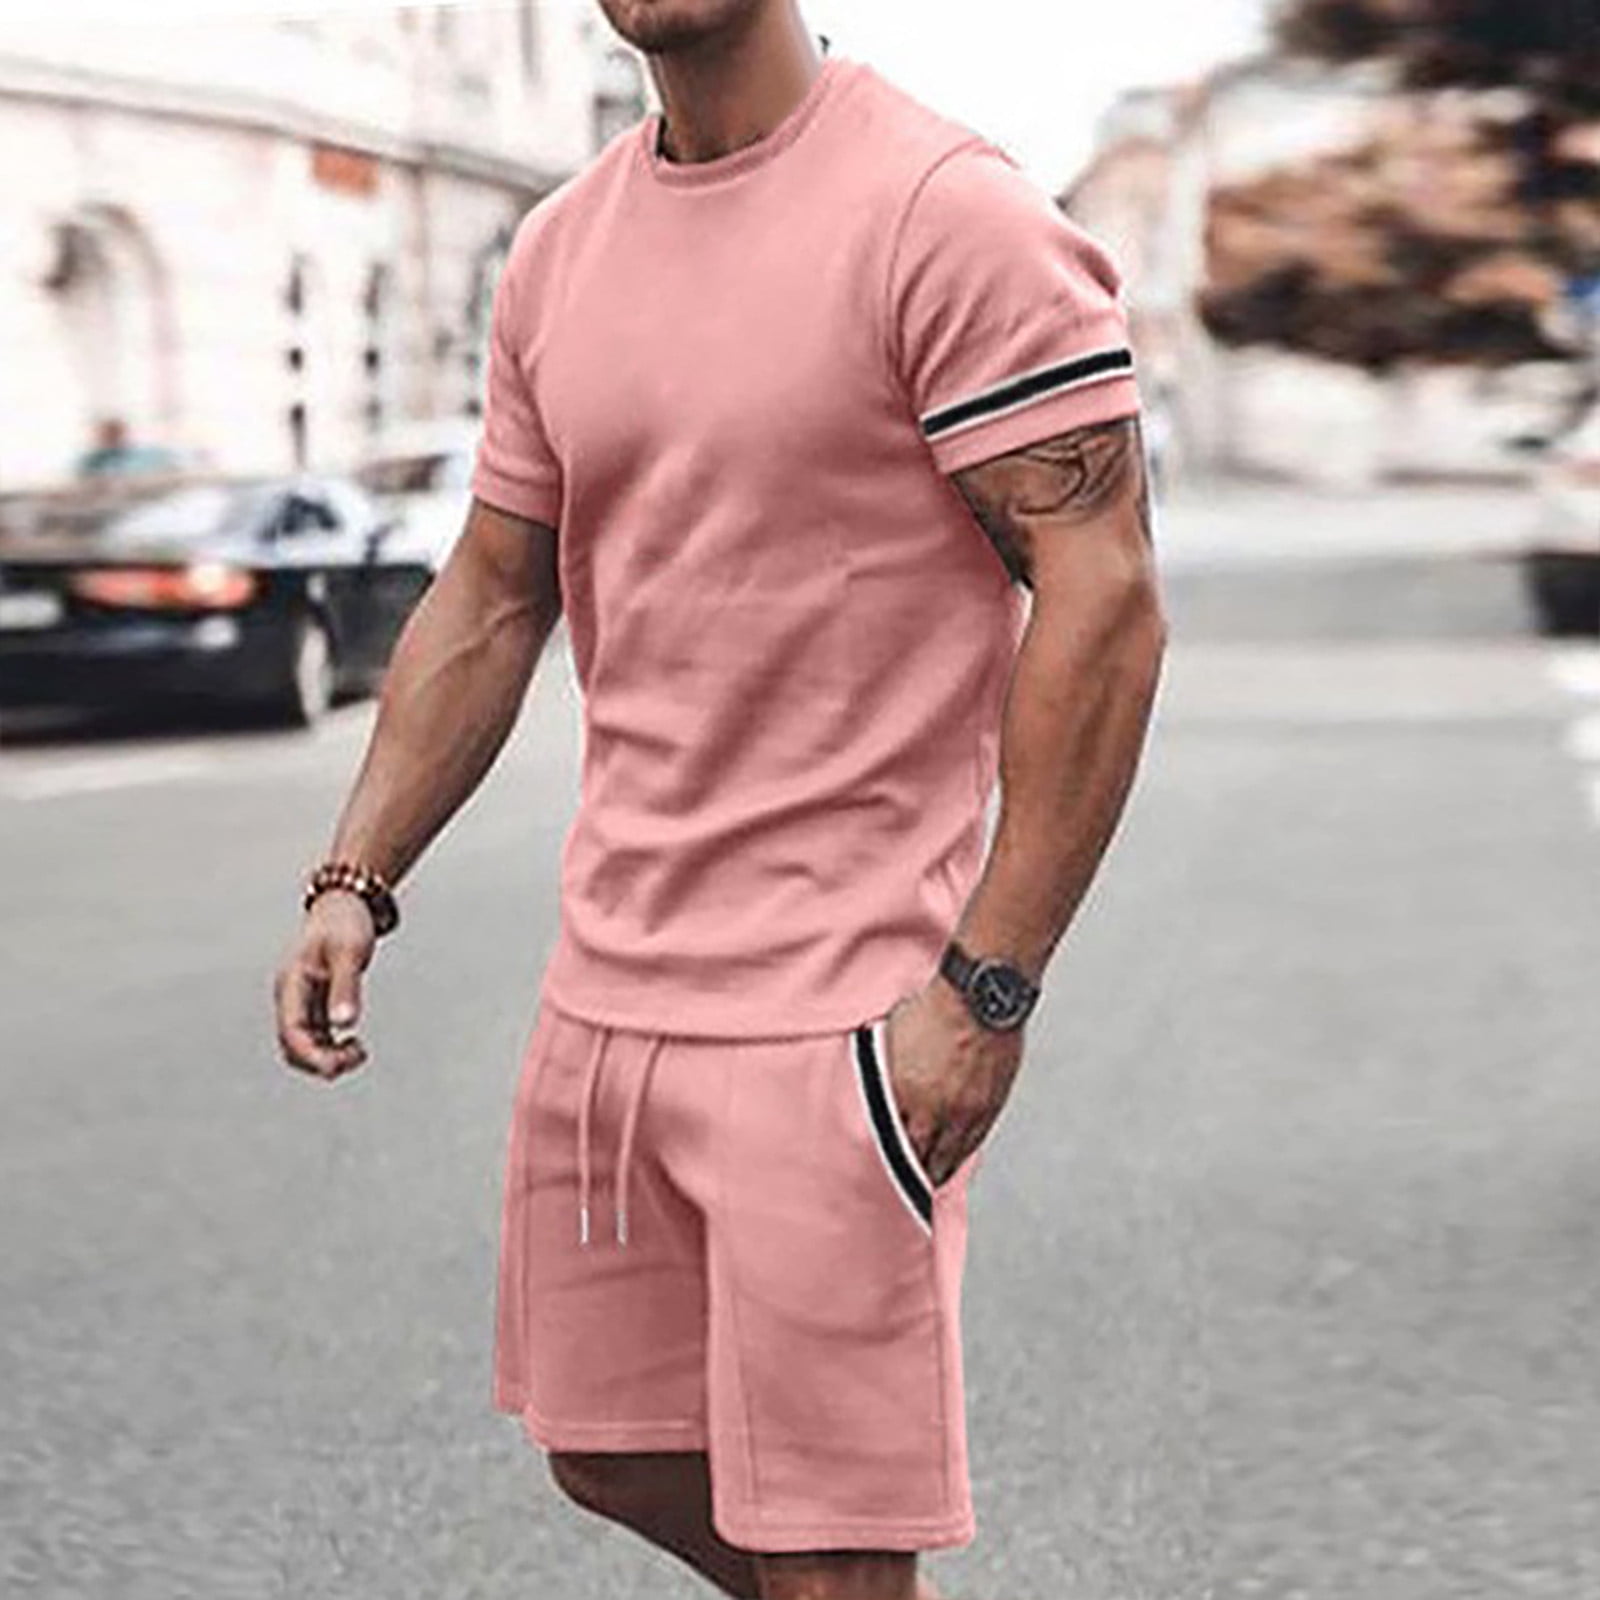 Akiihool Two Piece Short Outfits Mens Short Sets 2 Piece Outfits Casual  Shirt and Shorts Set (Pink,XXL) 